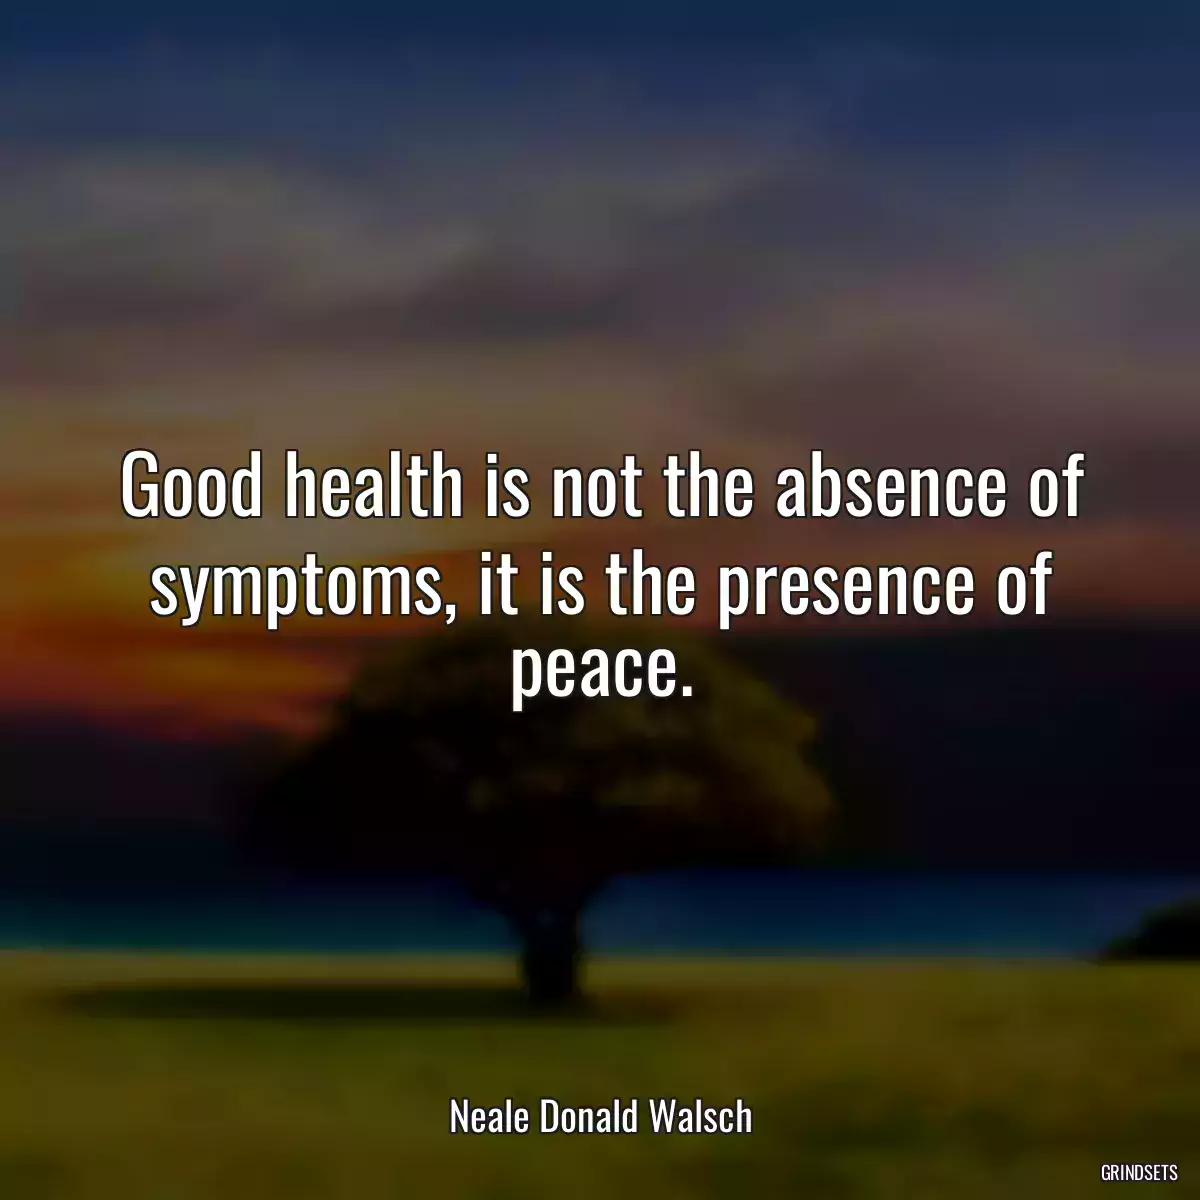 Good health is not the absence of symptoms, it is the presence of peace.